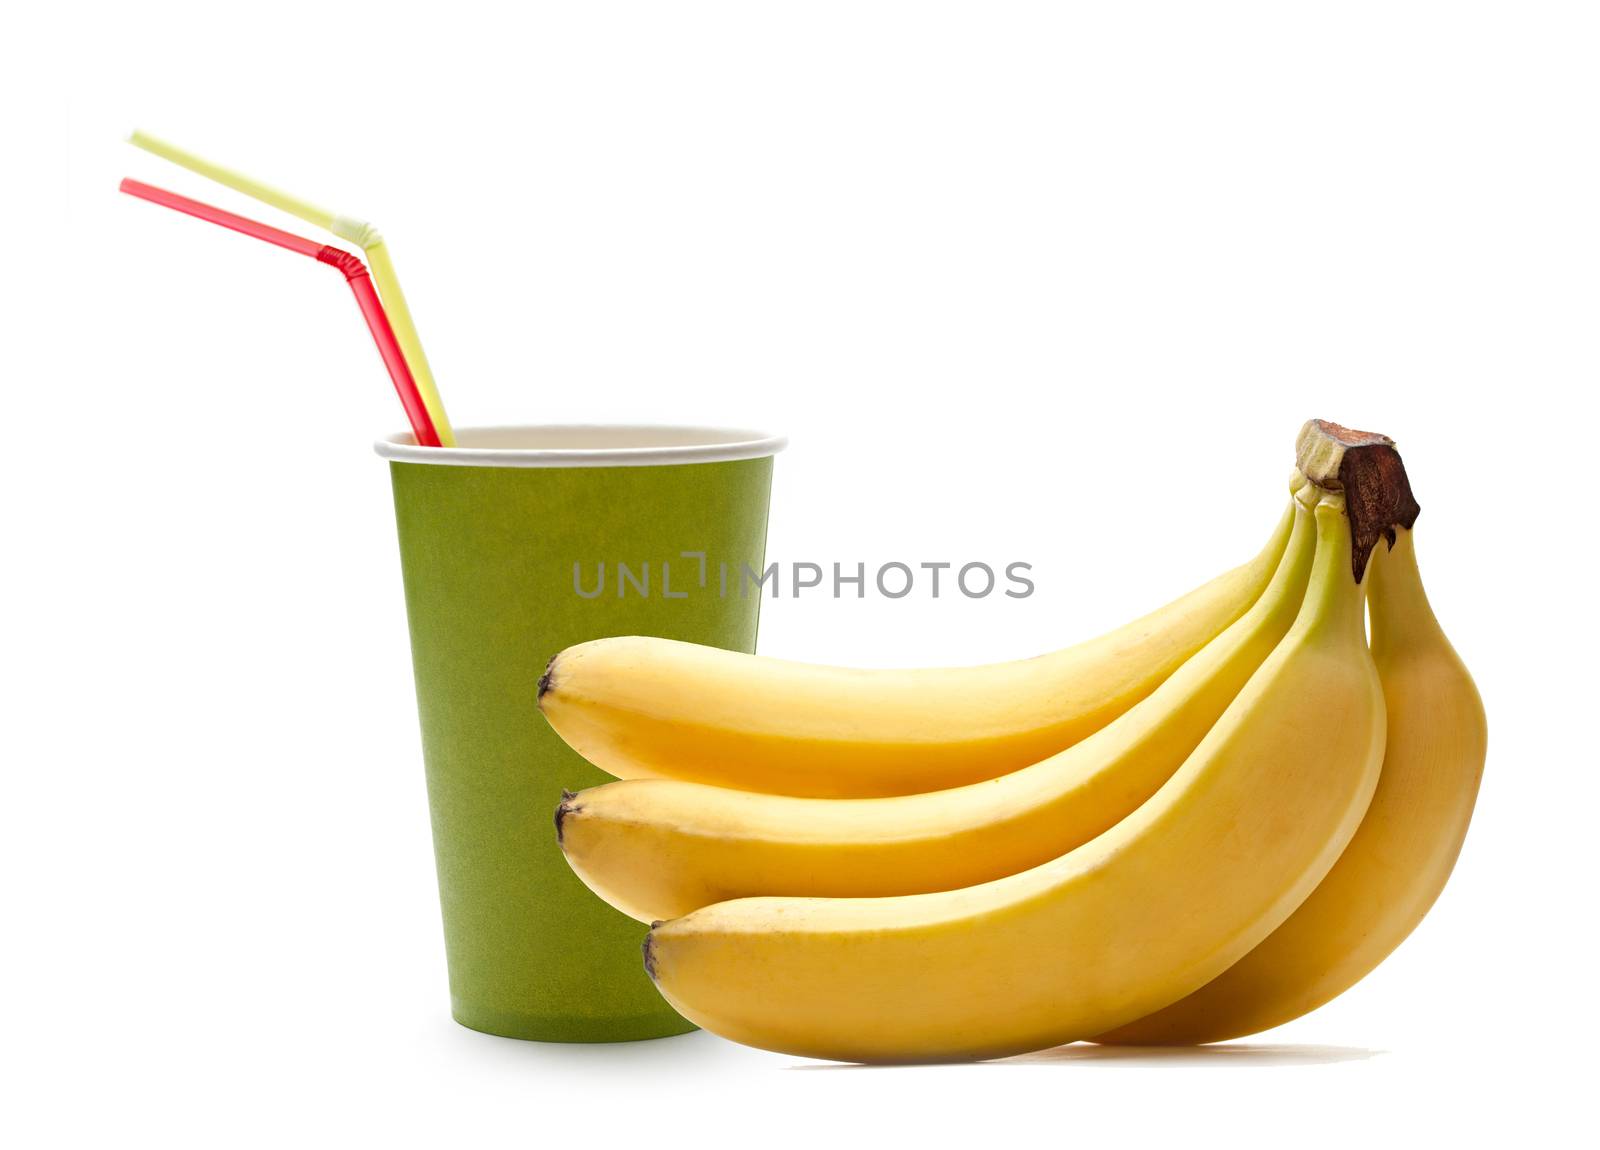 Paper cup with straws and bananas by Garsya